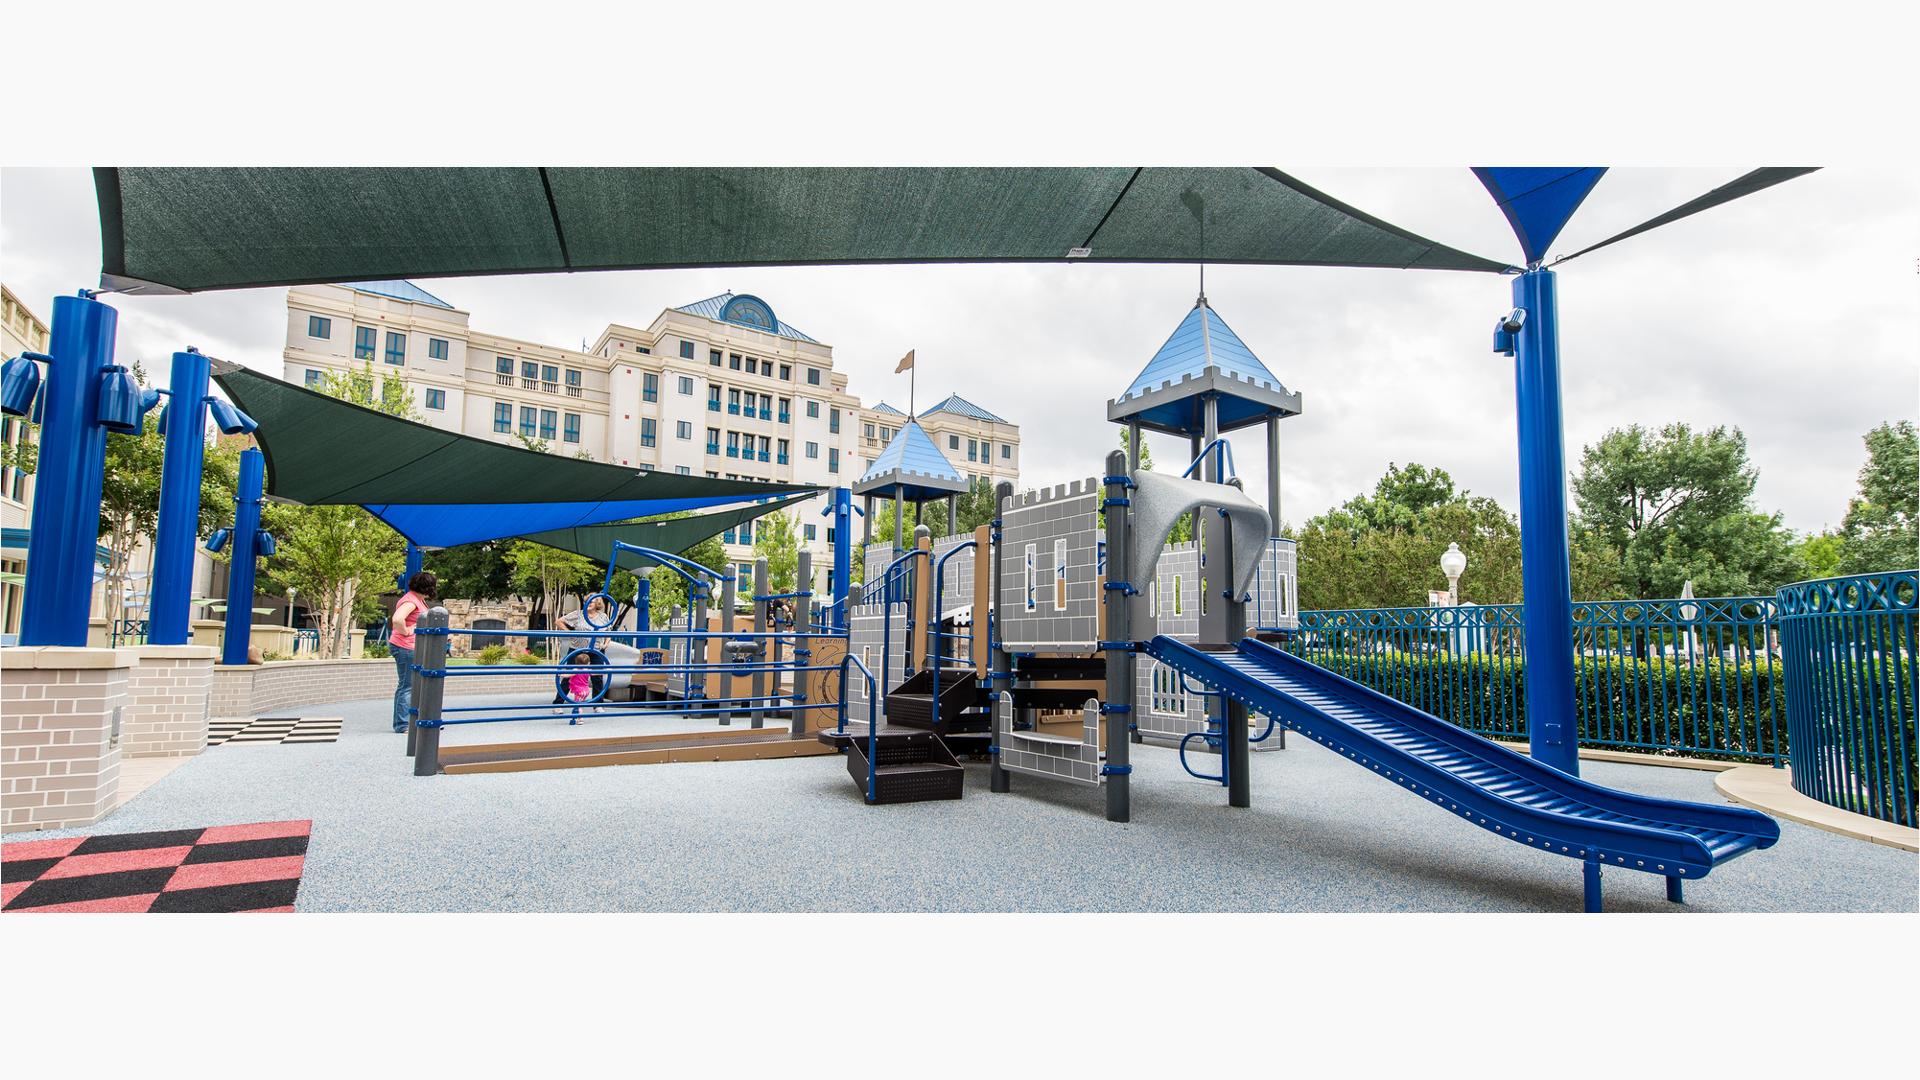 Cook Childrens Hospital playground featuring ramps and Roller Slide